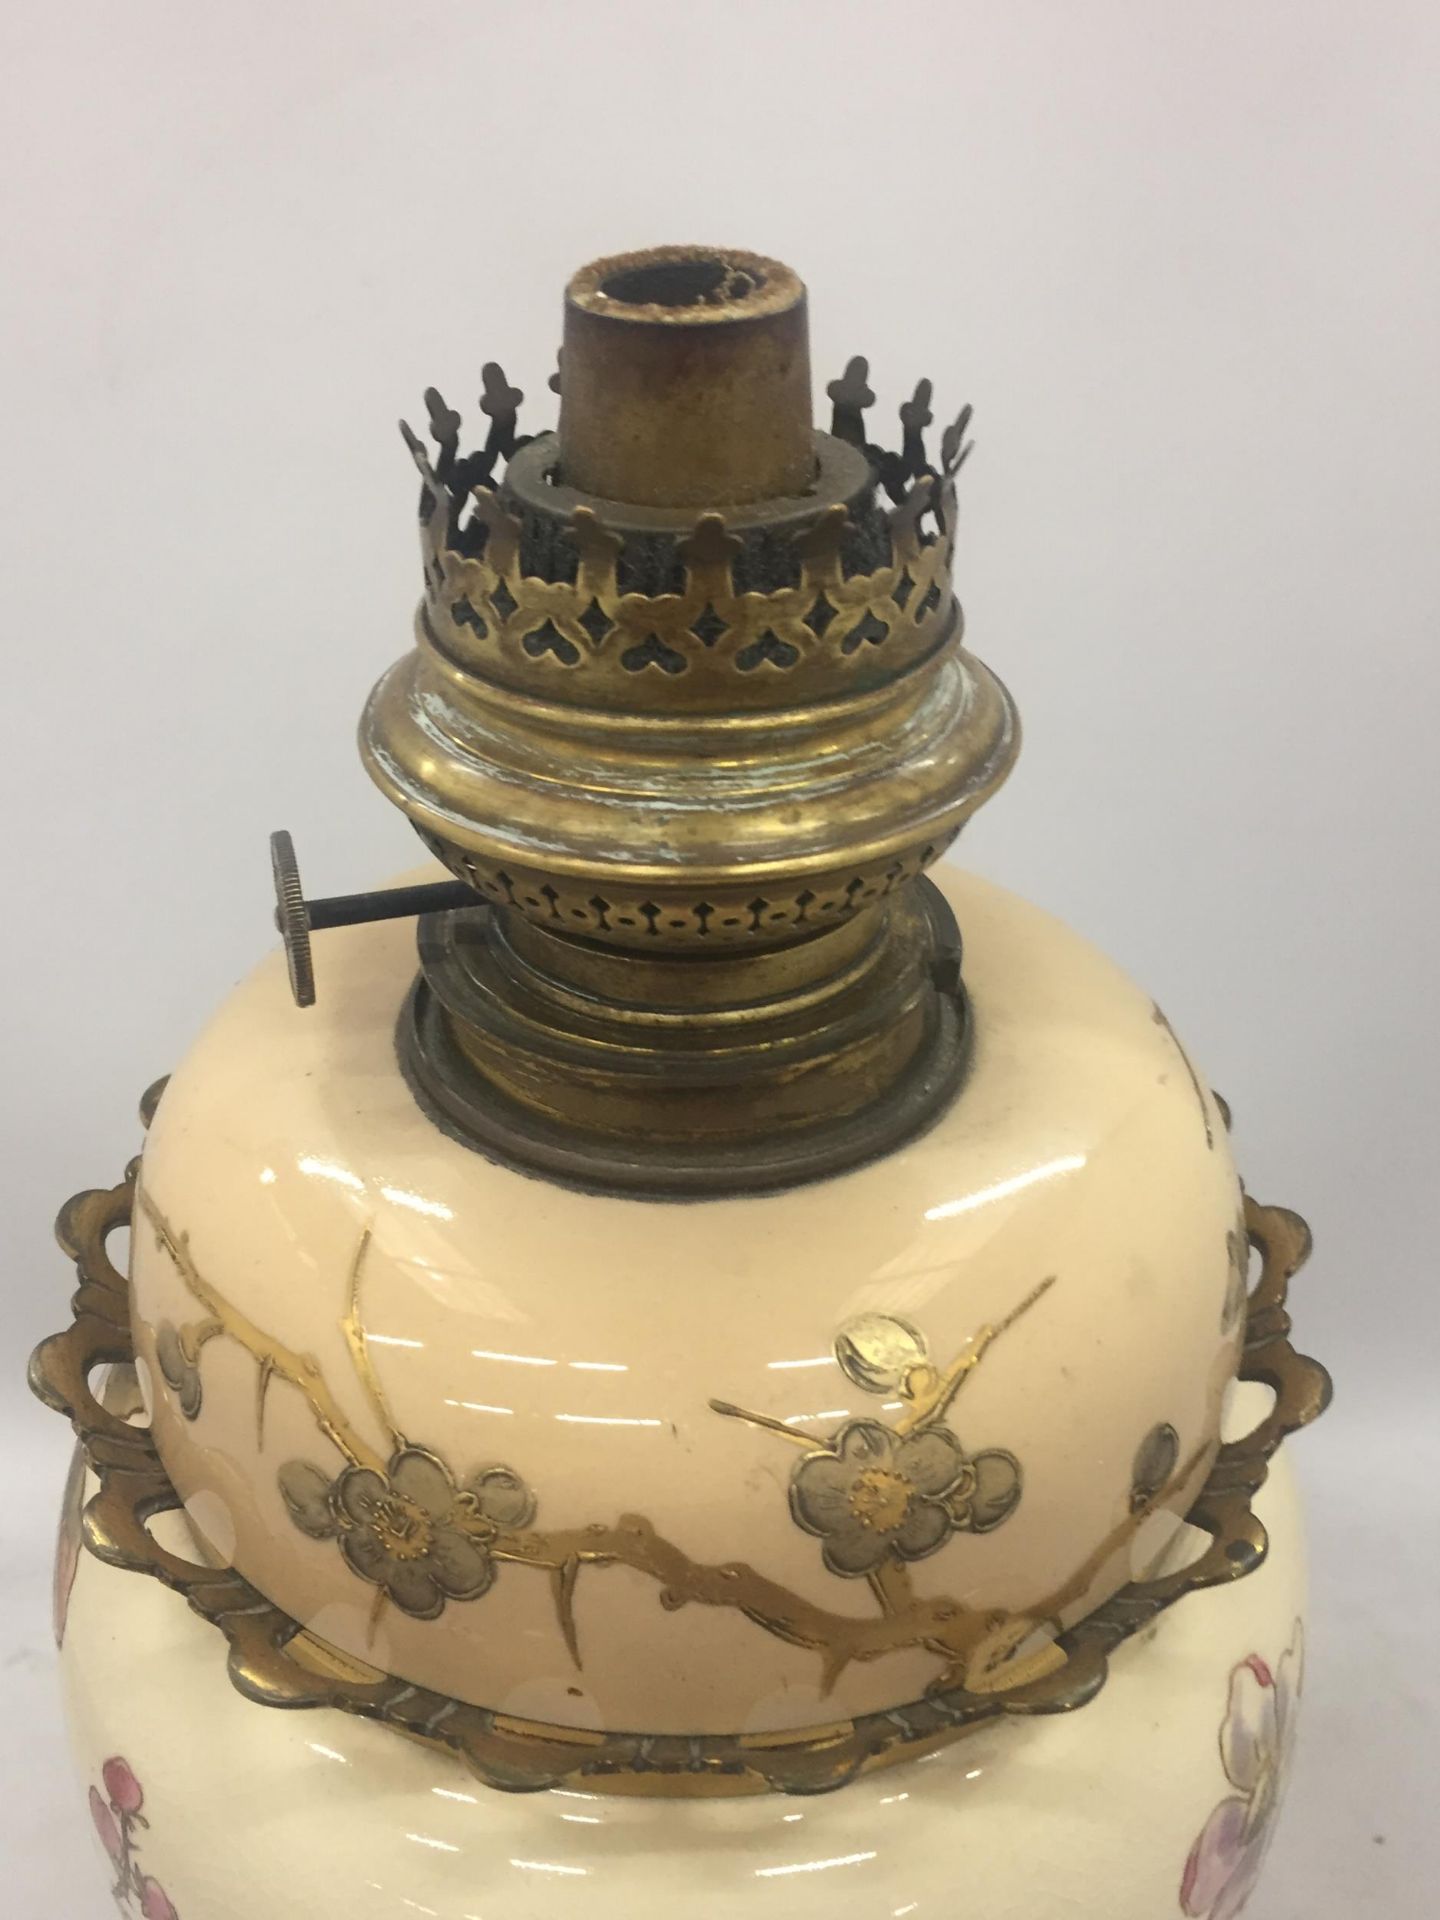 AN ANTIQUE CERAMIC AND BRASS OIL LAMP WITH FLORAL DESIGN - Image 2 of 3